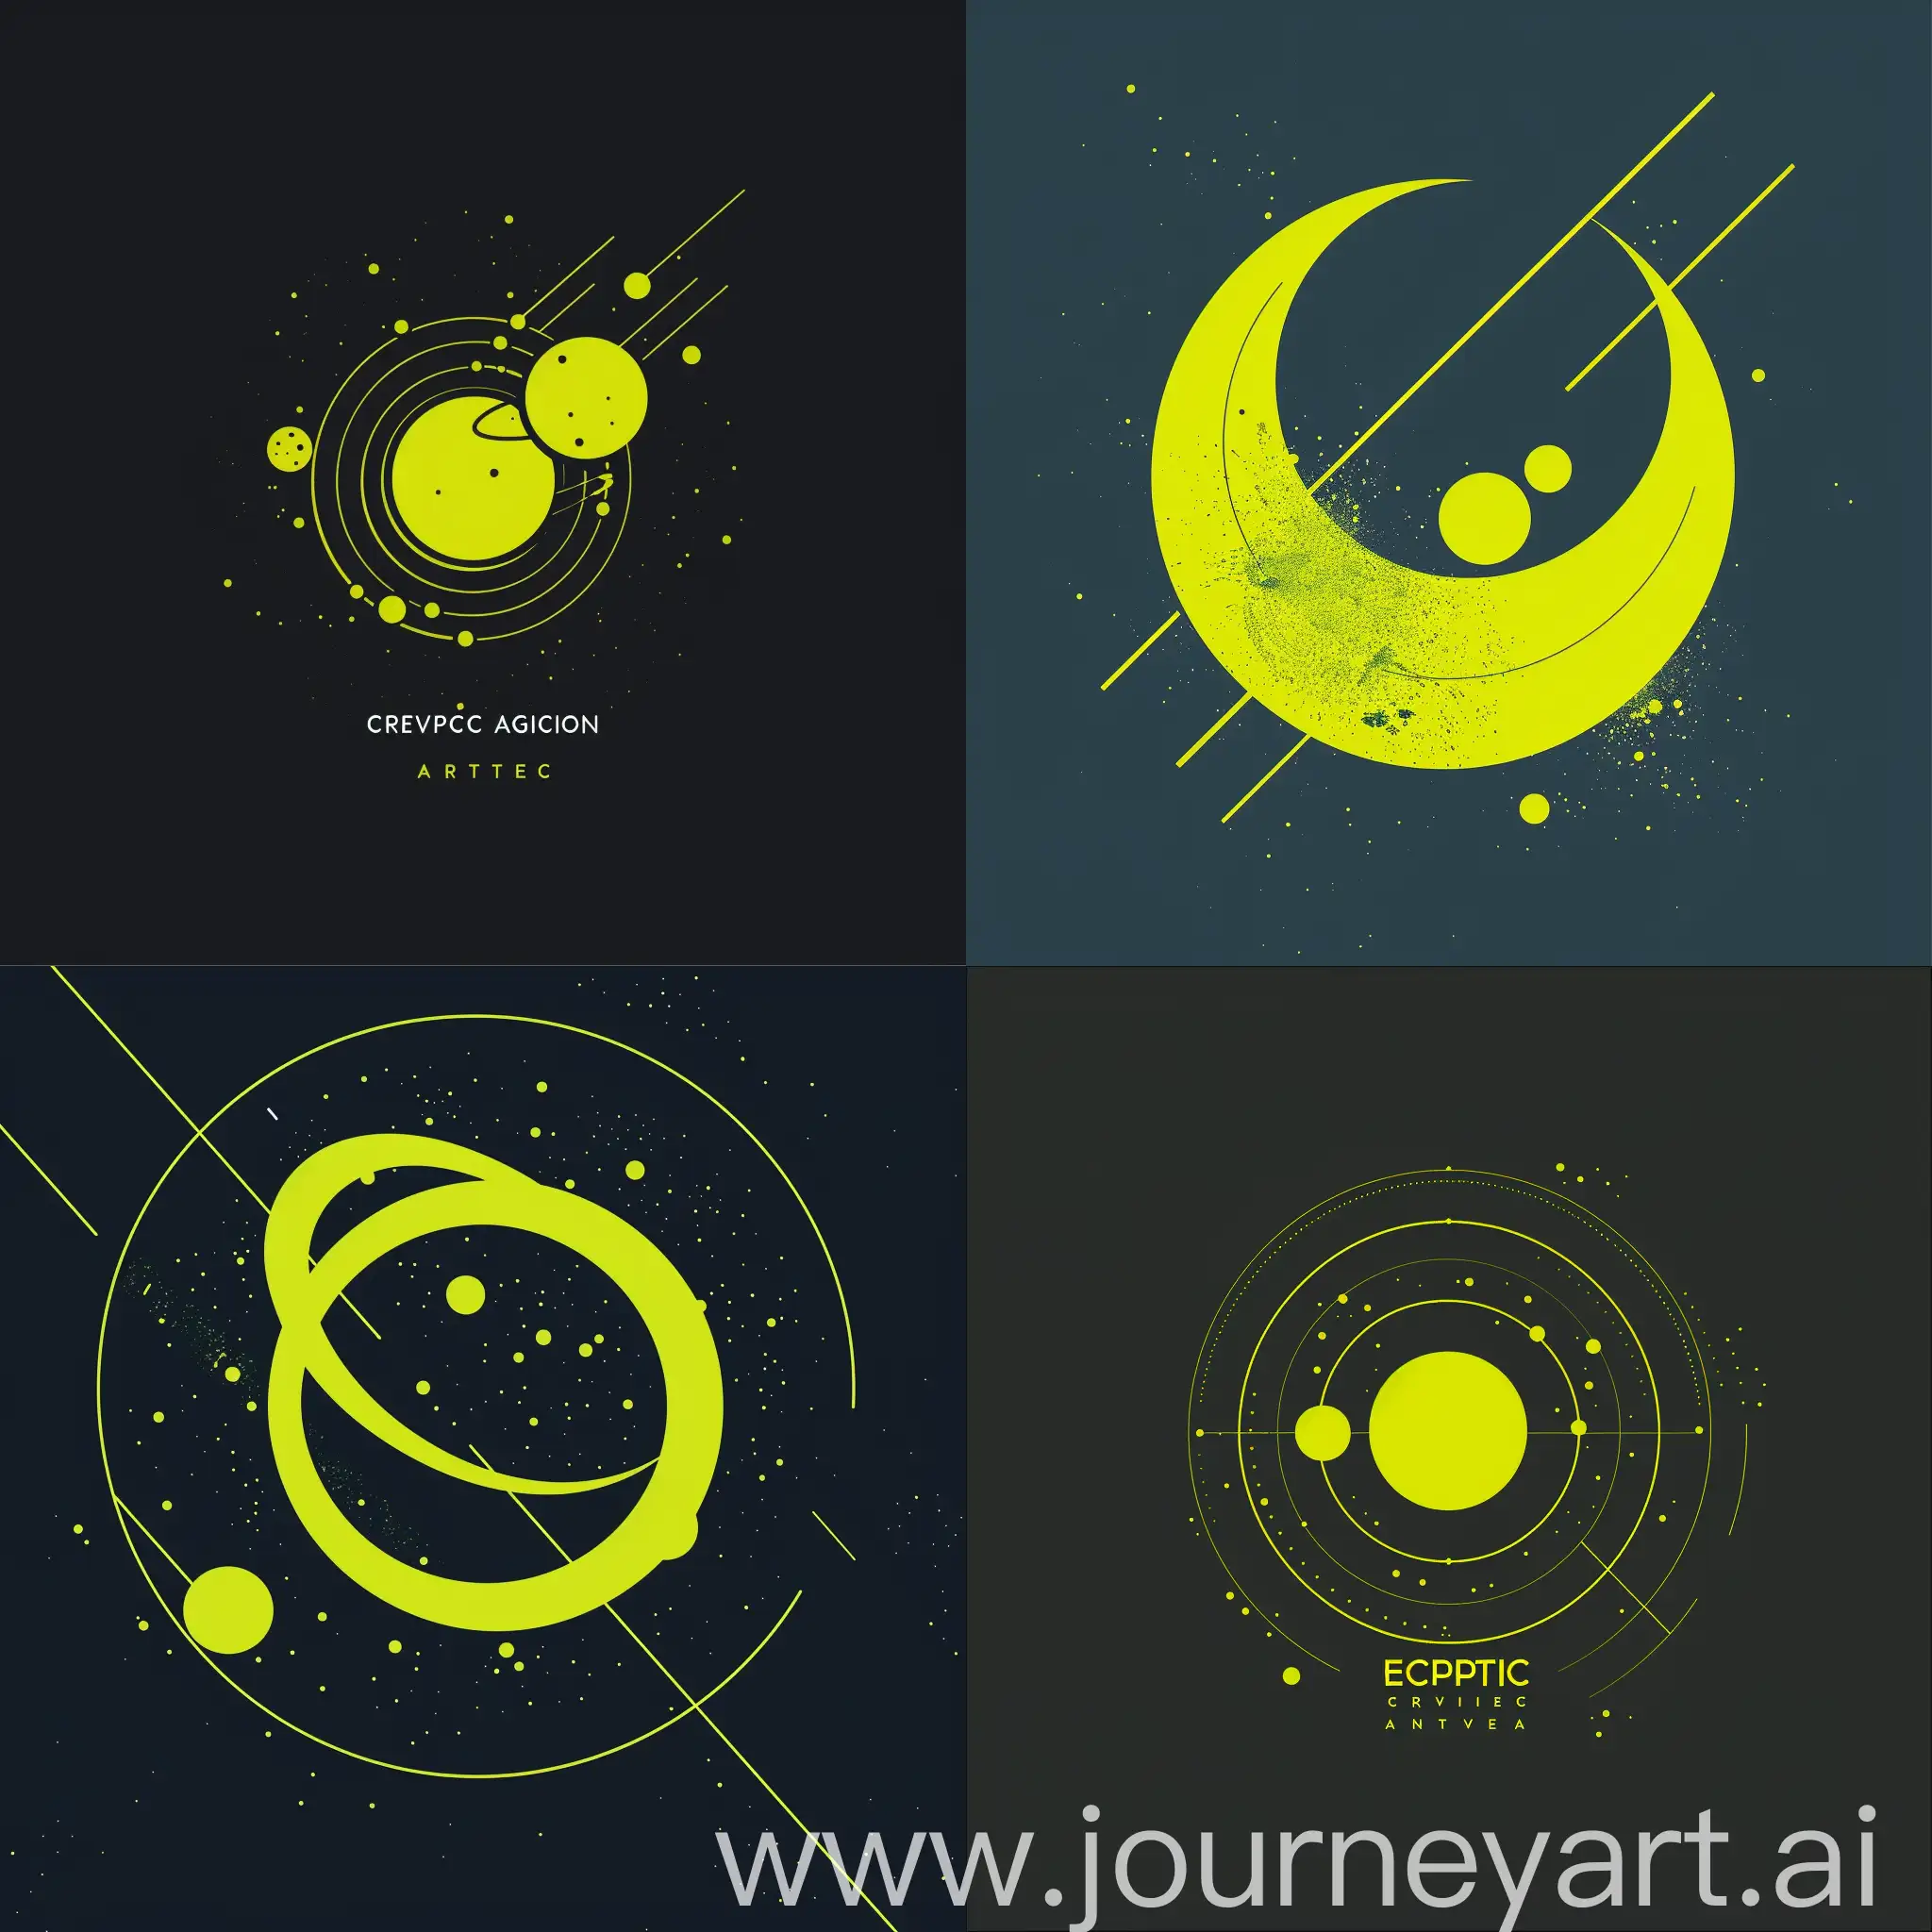 Design a modern logo for 'Ecliptic Creative Agency' featuring vibrant lime-yellow. Include subtle celestial-themed elements like the moon or orbits to convey creativity and exploration. keep it minimal